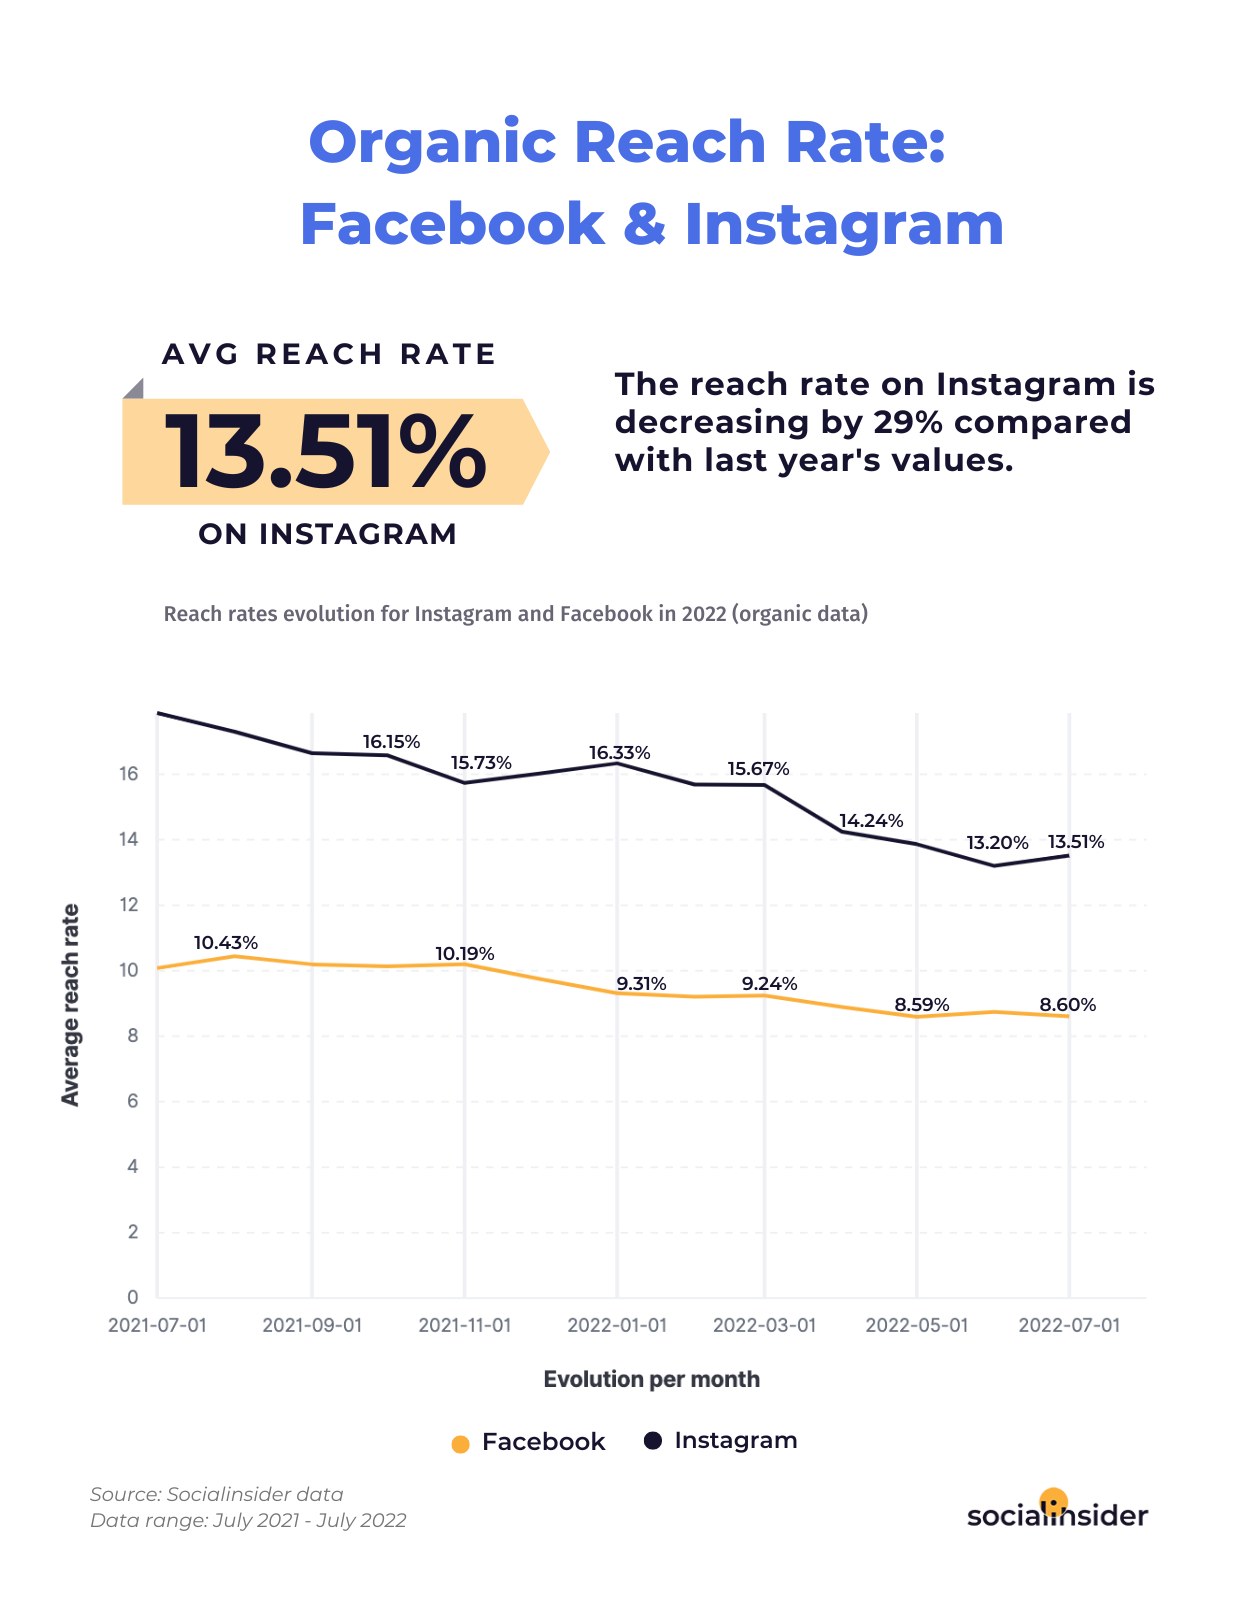 Here's a chart showing what's the organic social media reach for Facebook and Instagram in 2022.